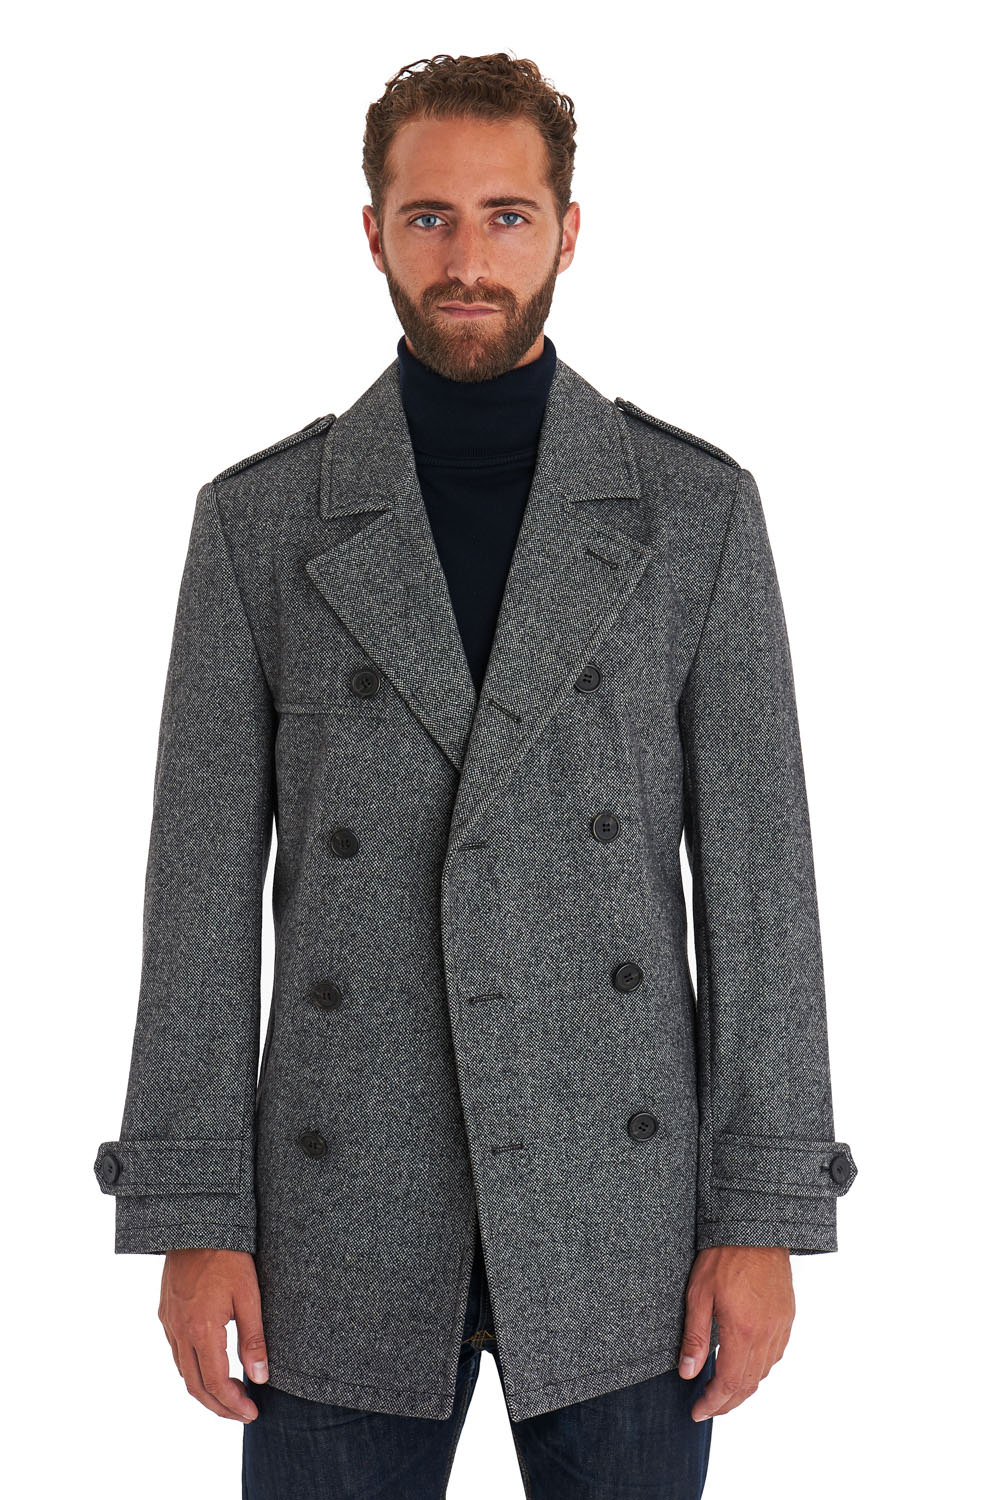 Moss 1851 Tailored Fit Grey Double Breasted Jacket | Buy Online at Moss